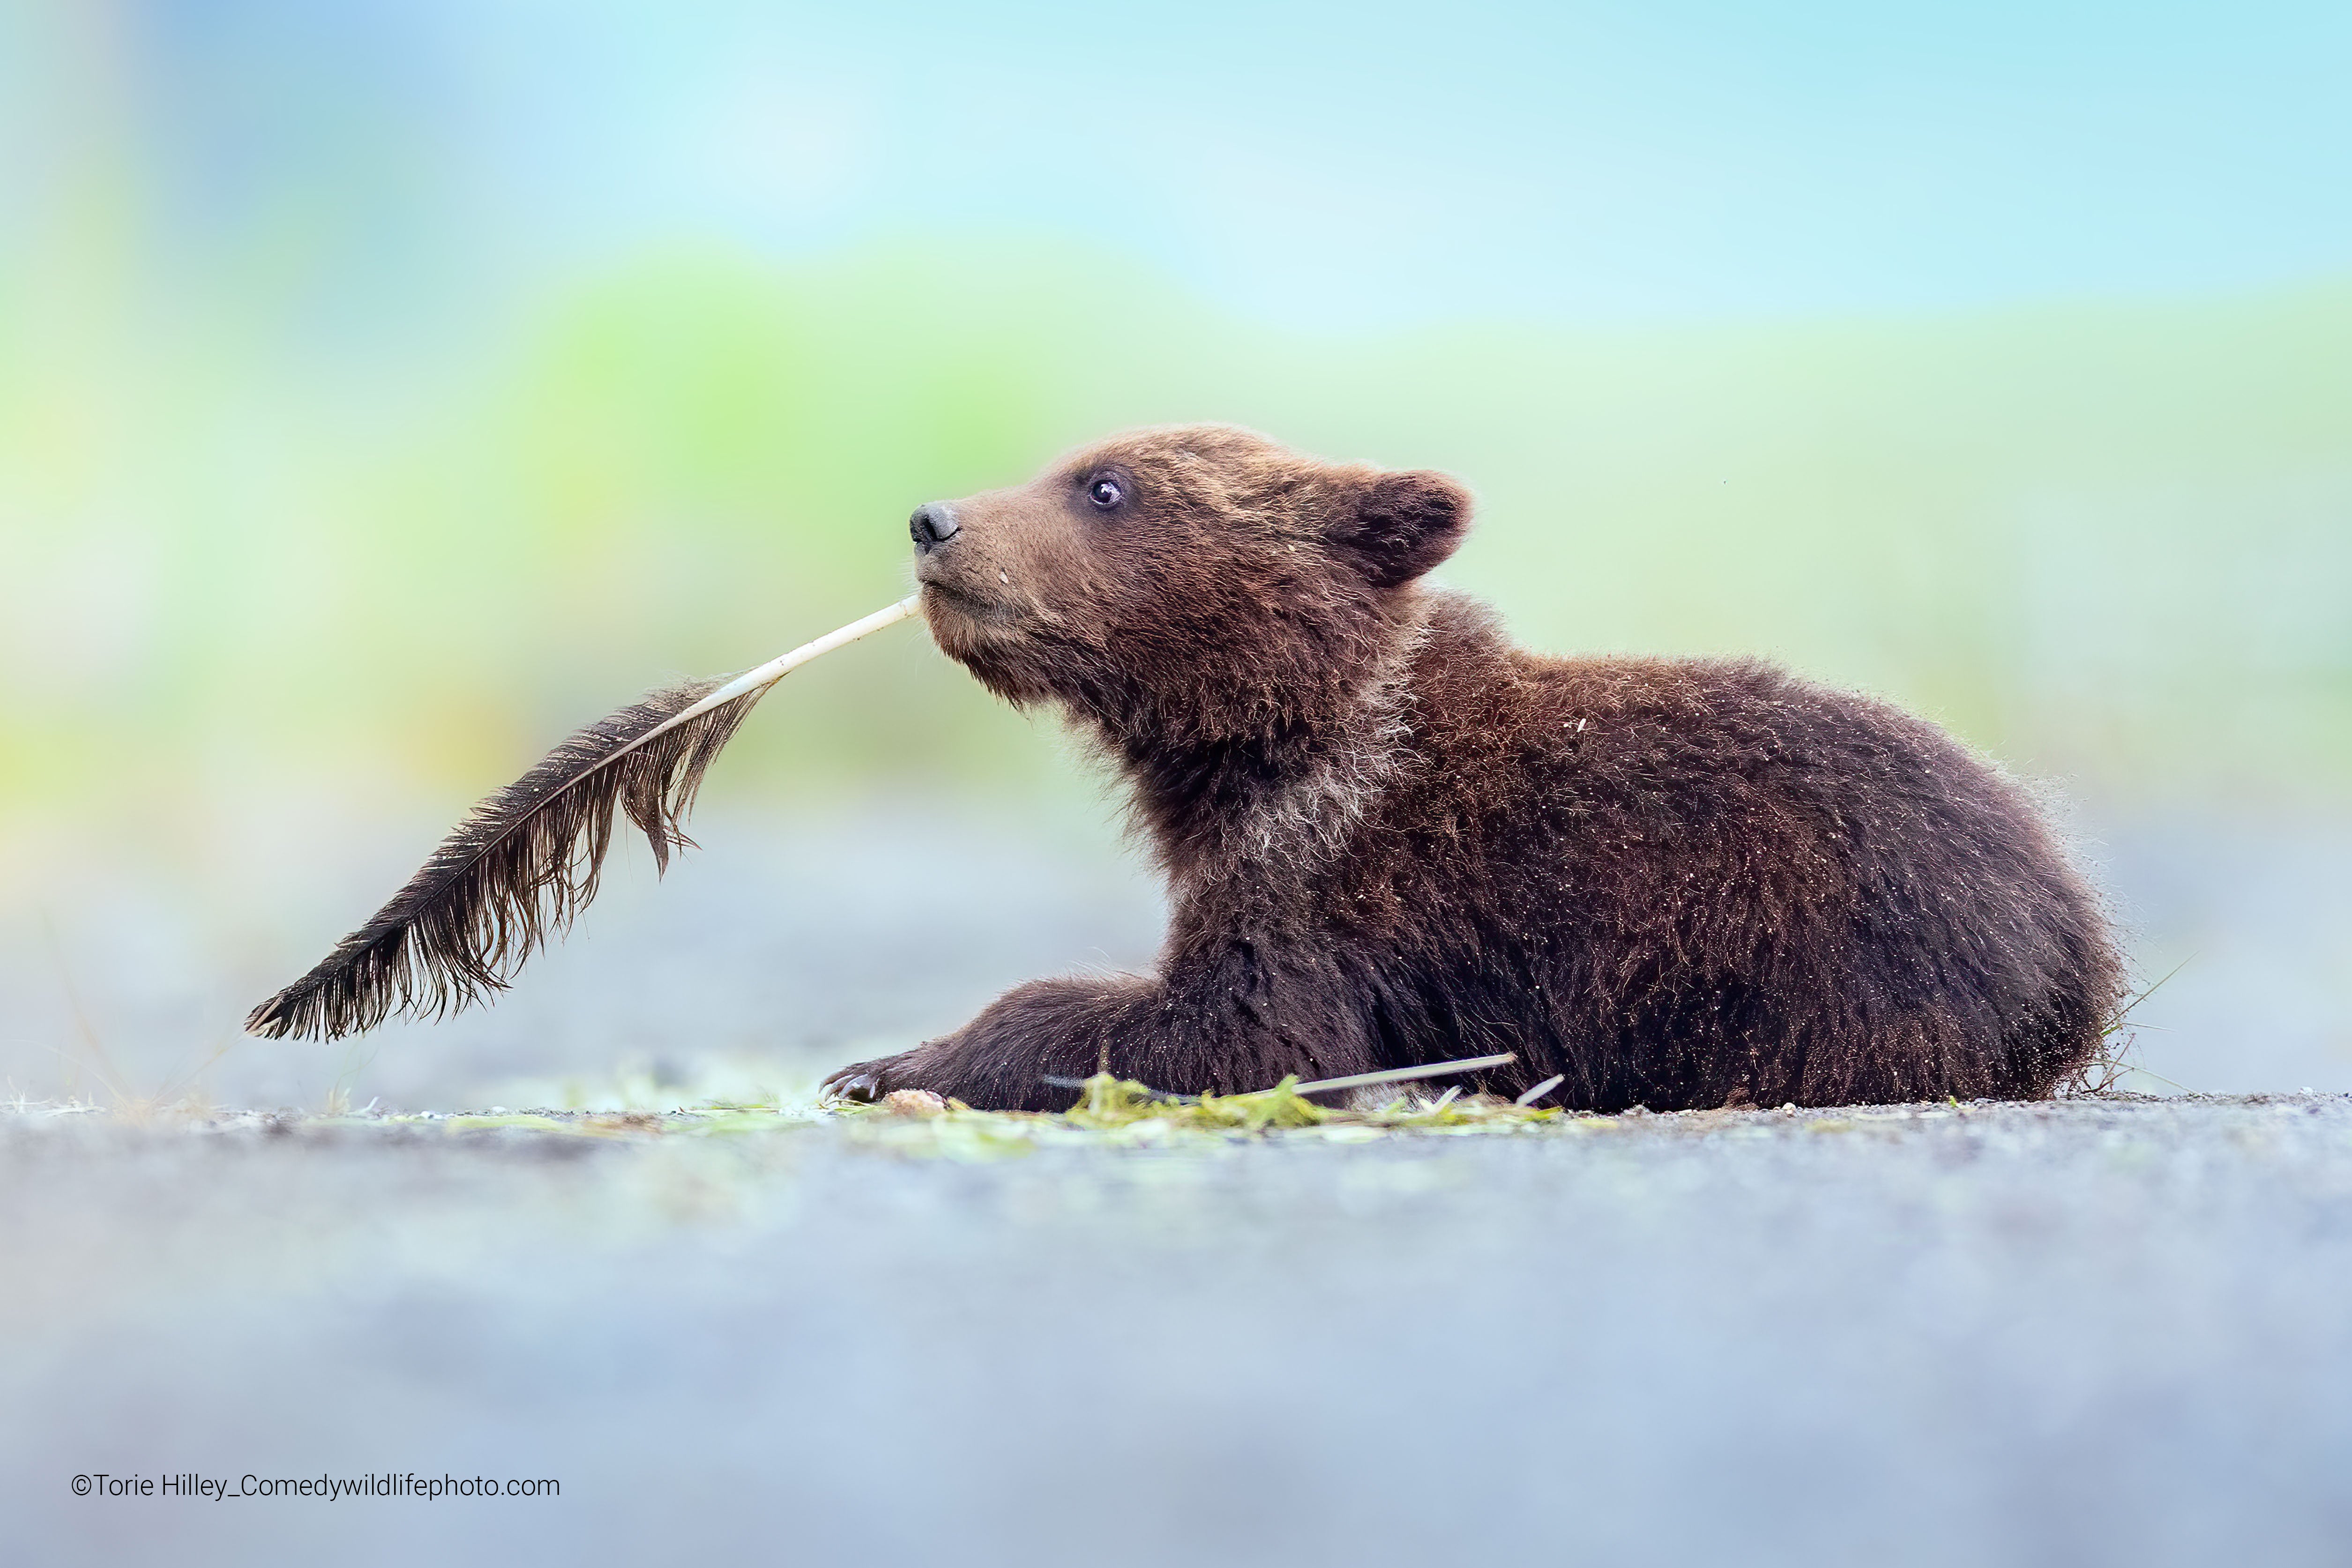 A bear cub holds a feather in her mouth. (Photo: © Torie Hilley / Comedywildlifephoto.com.)